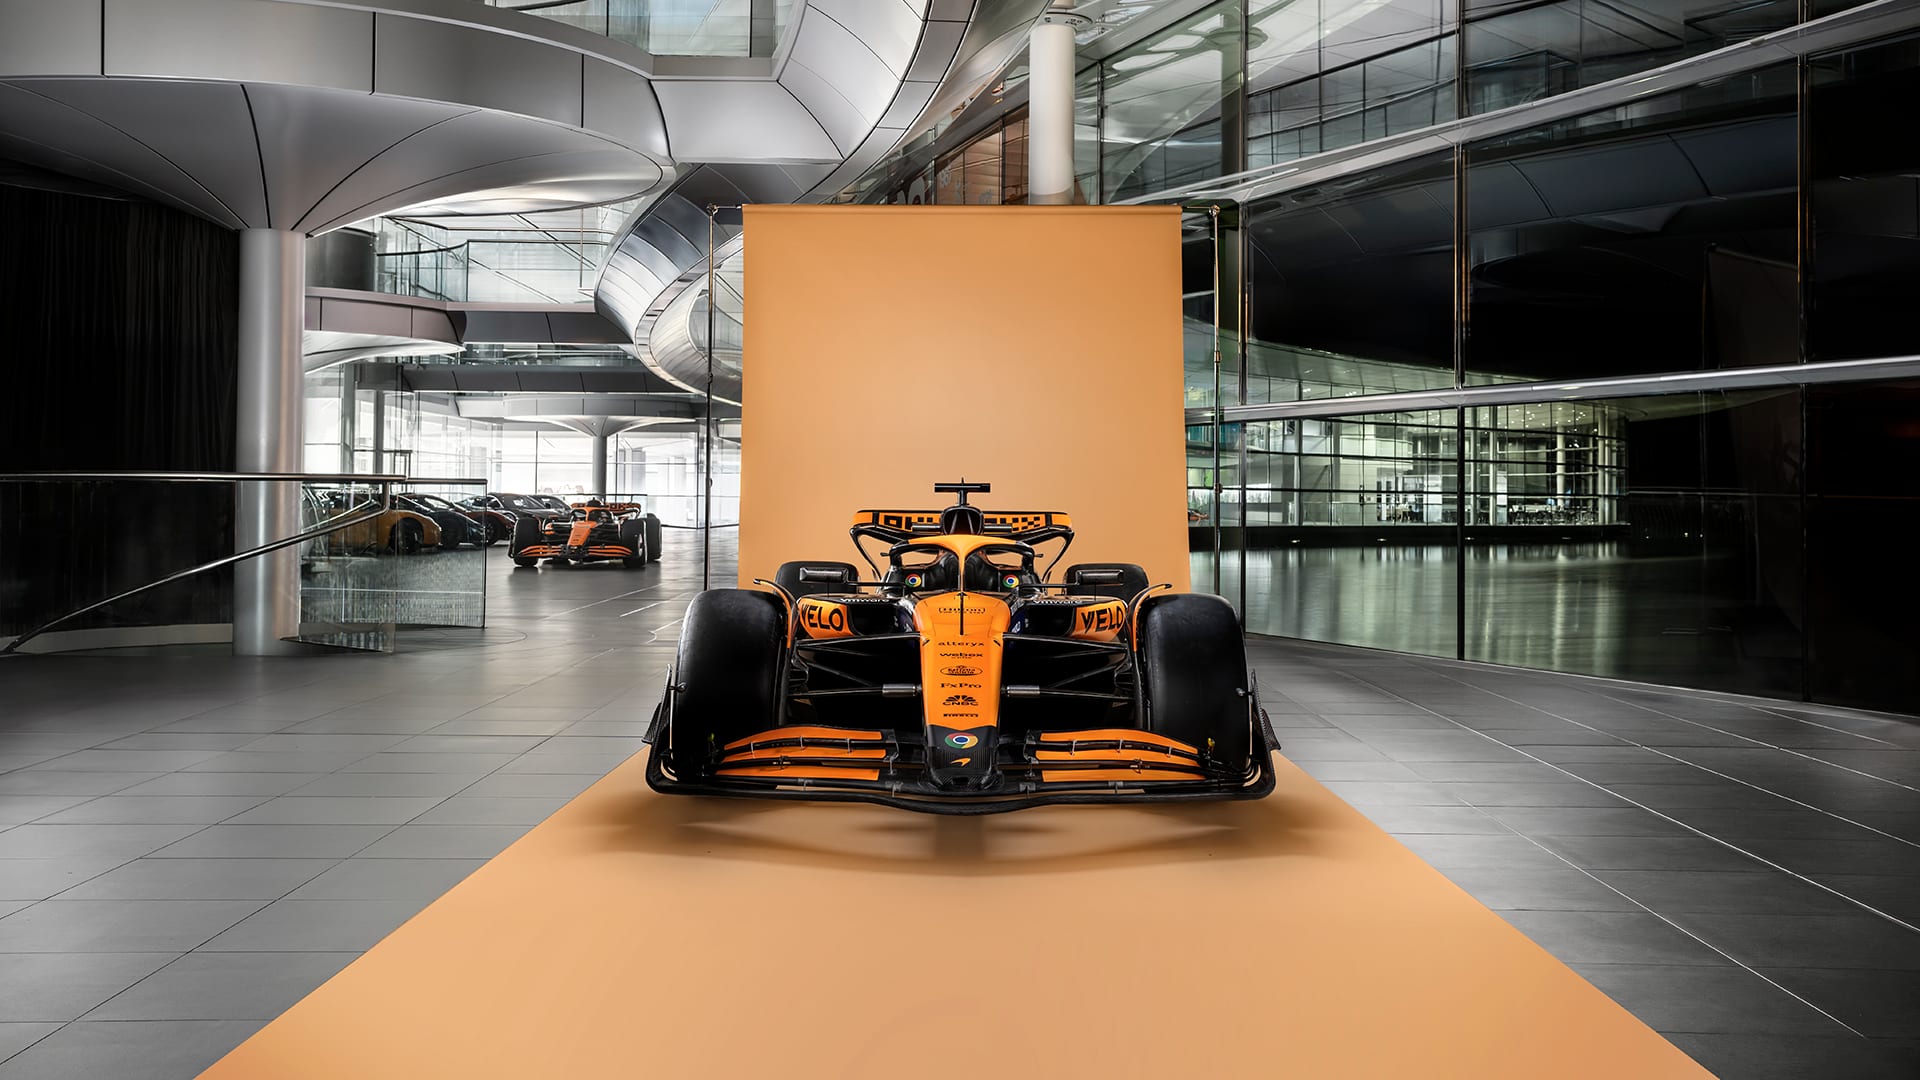 FIRST LOOK: McLaren present new F1 car ahead of Silverstone shakedown